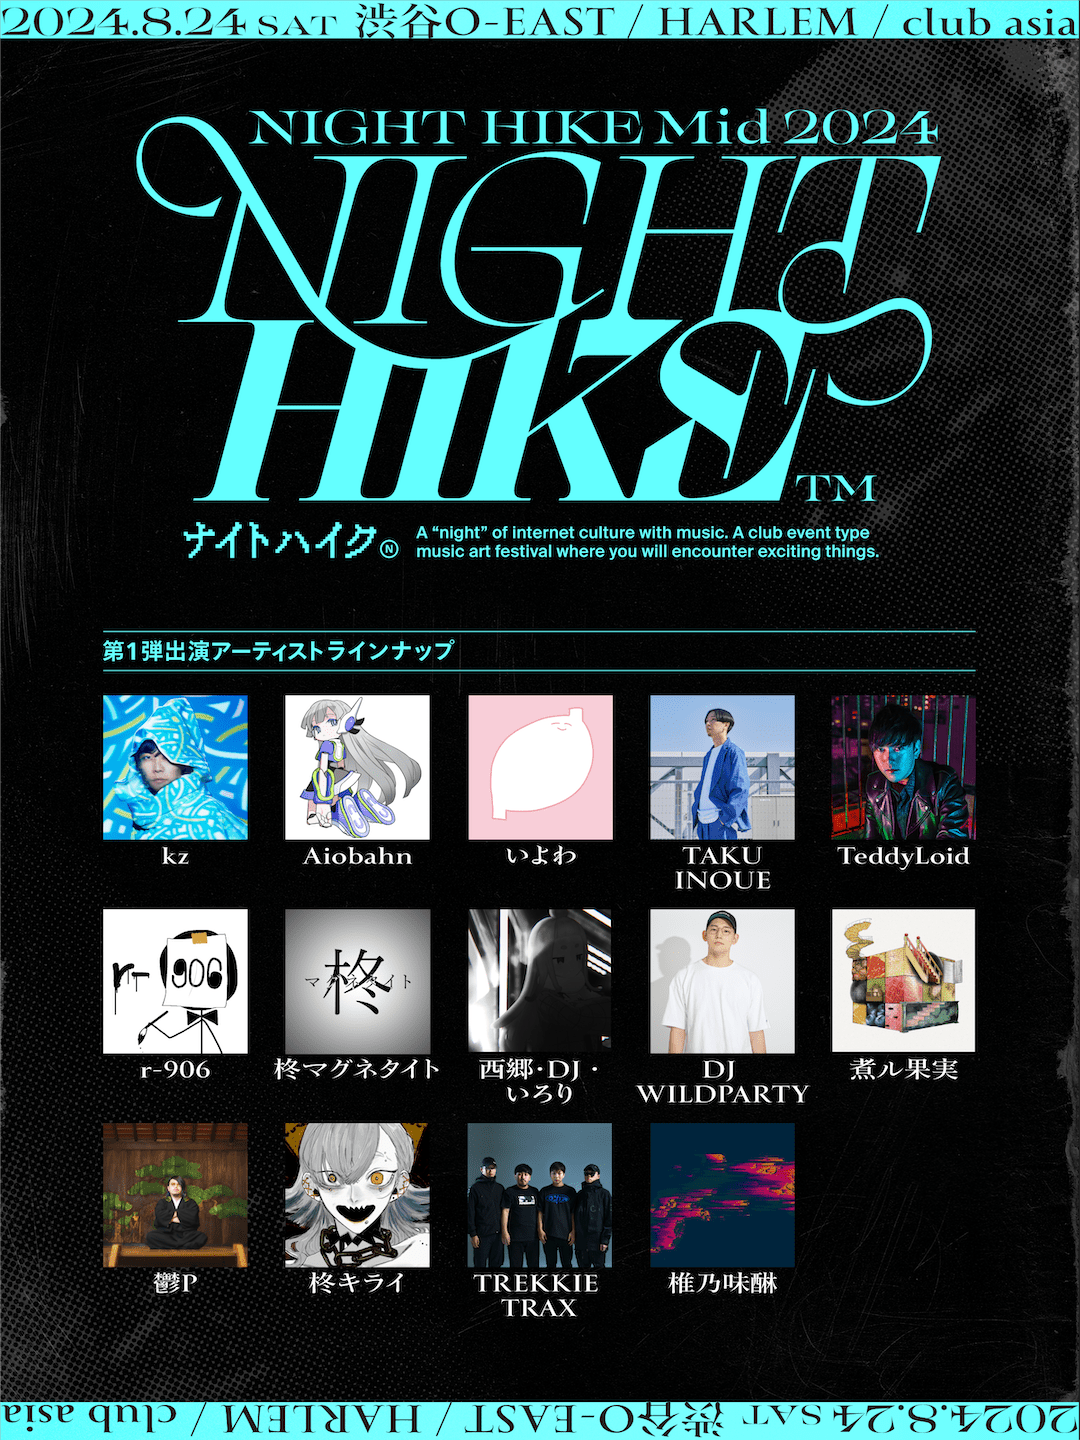 NIGHT HIKE Mid 2024 supported by ジンドゥー | Zaiko